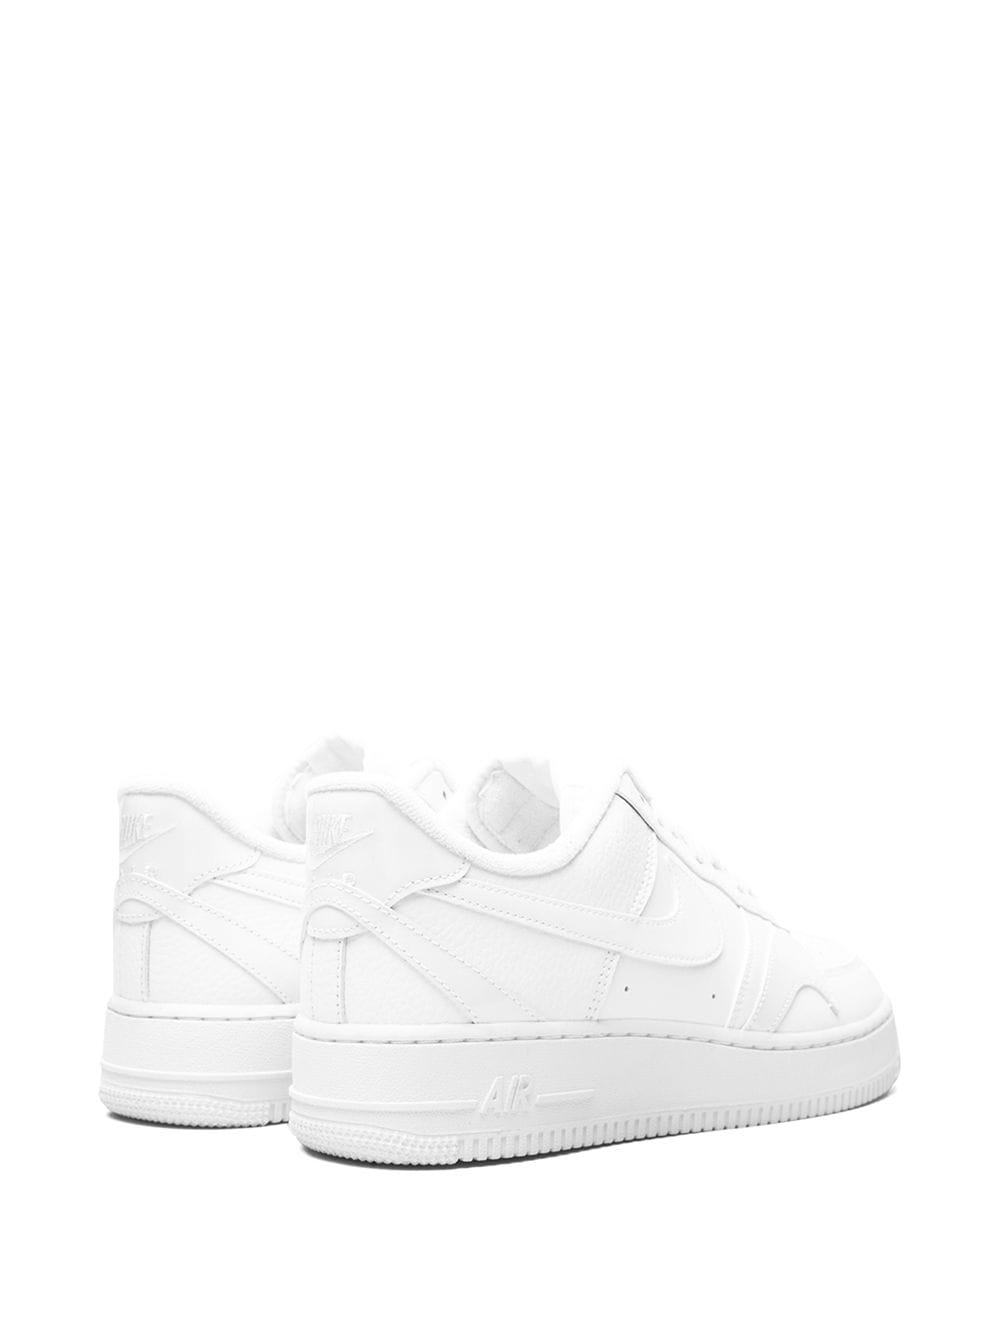 Shop Nike Air Force 1 '07 Lv8 "misplaced Swoosh In White